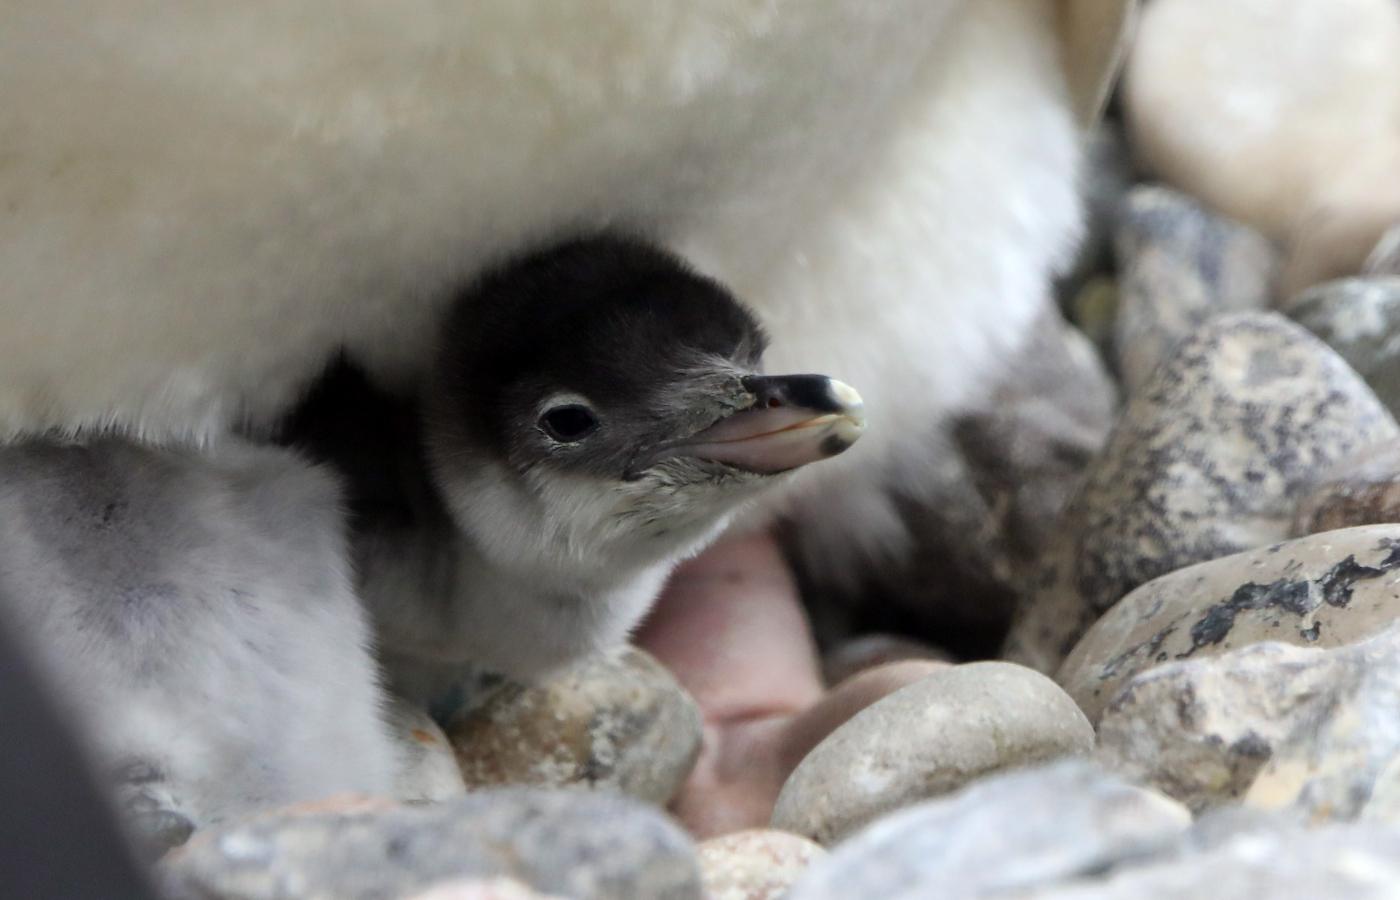 The zoo also look out for foster parents for newborn chicks each year.